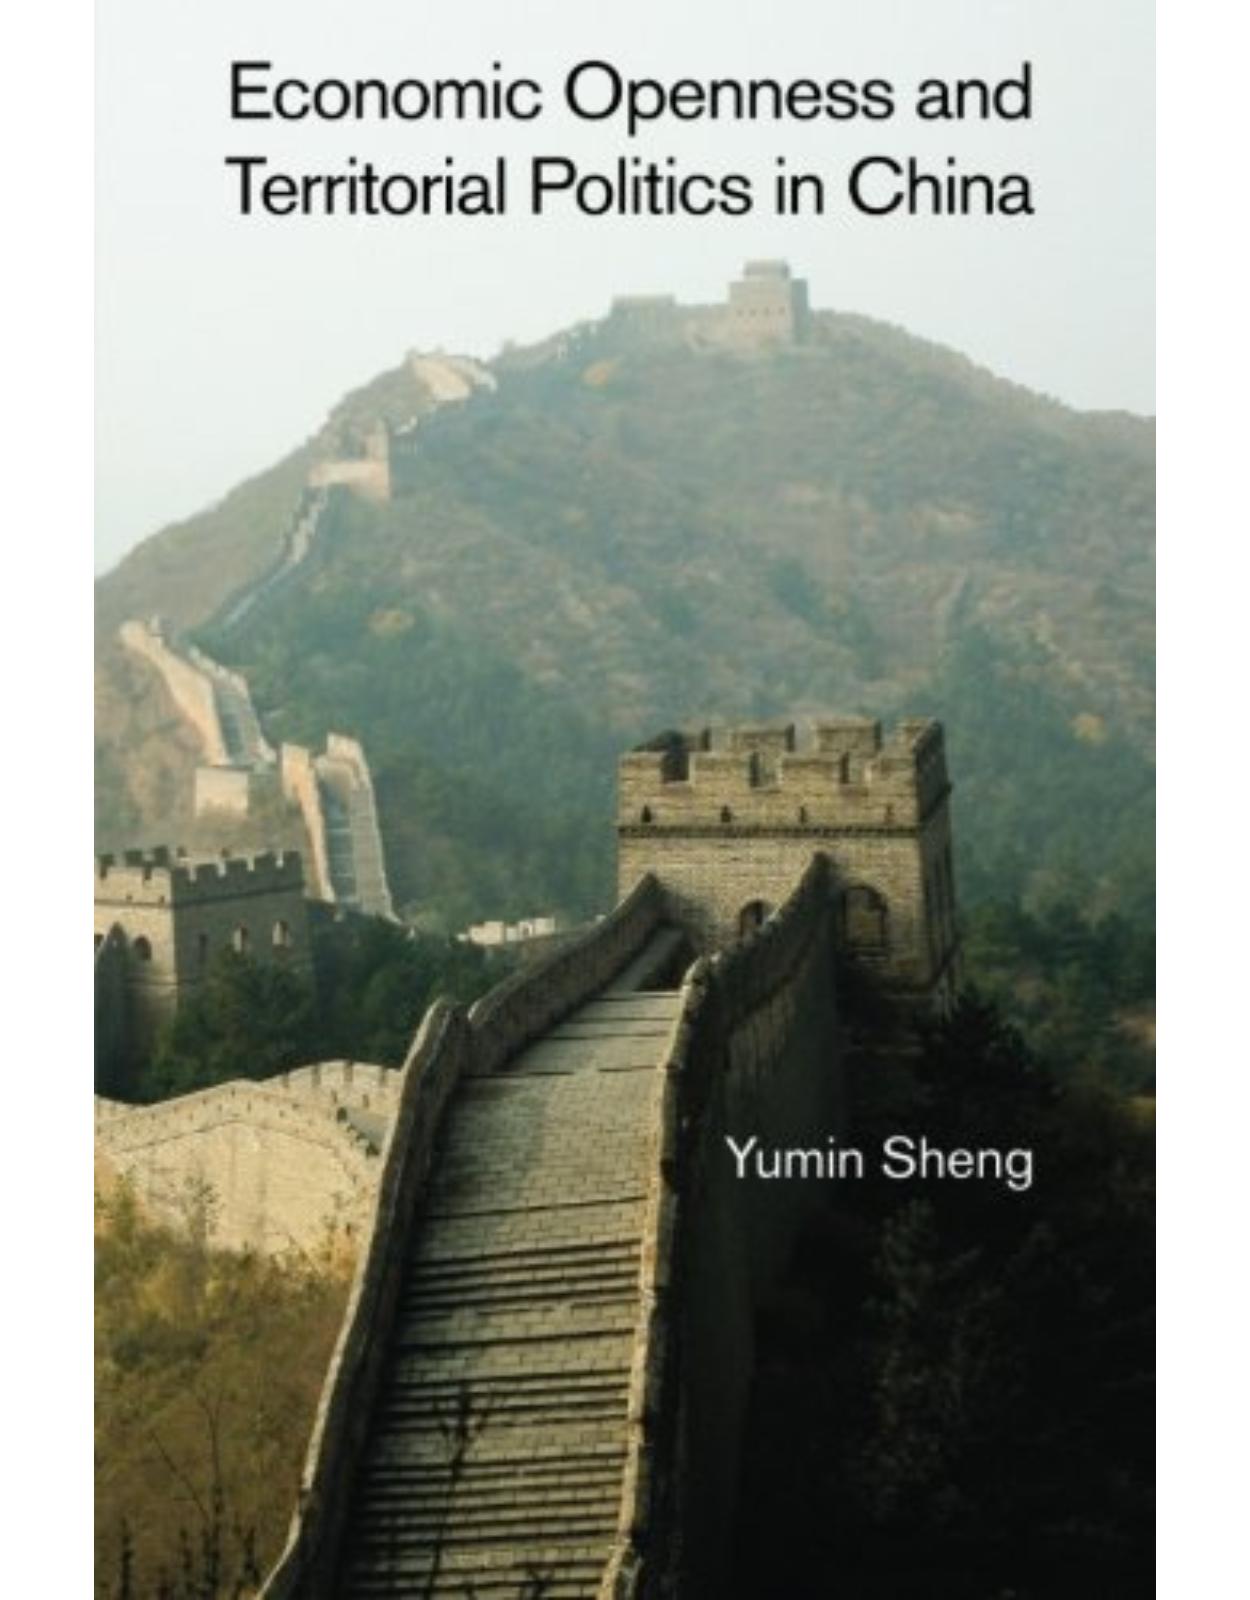 Economic Openness and Territorial Politics in China